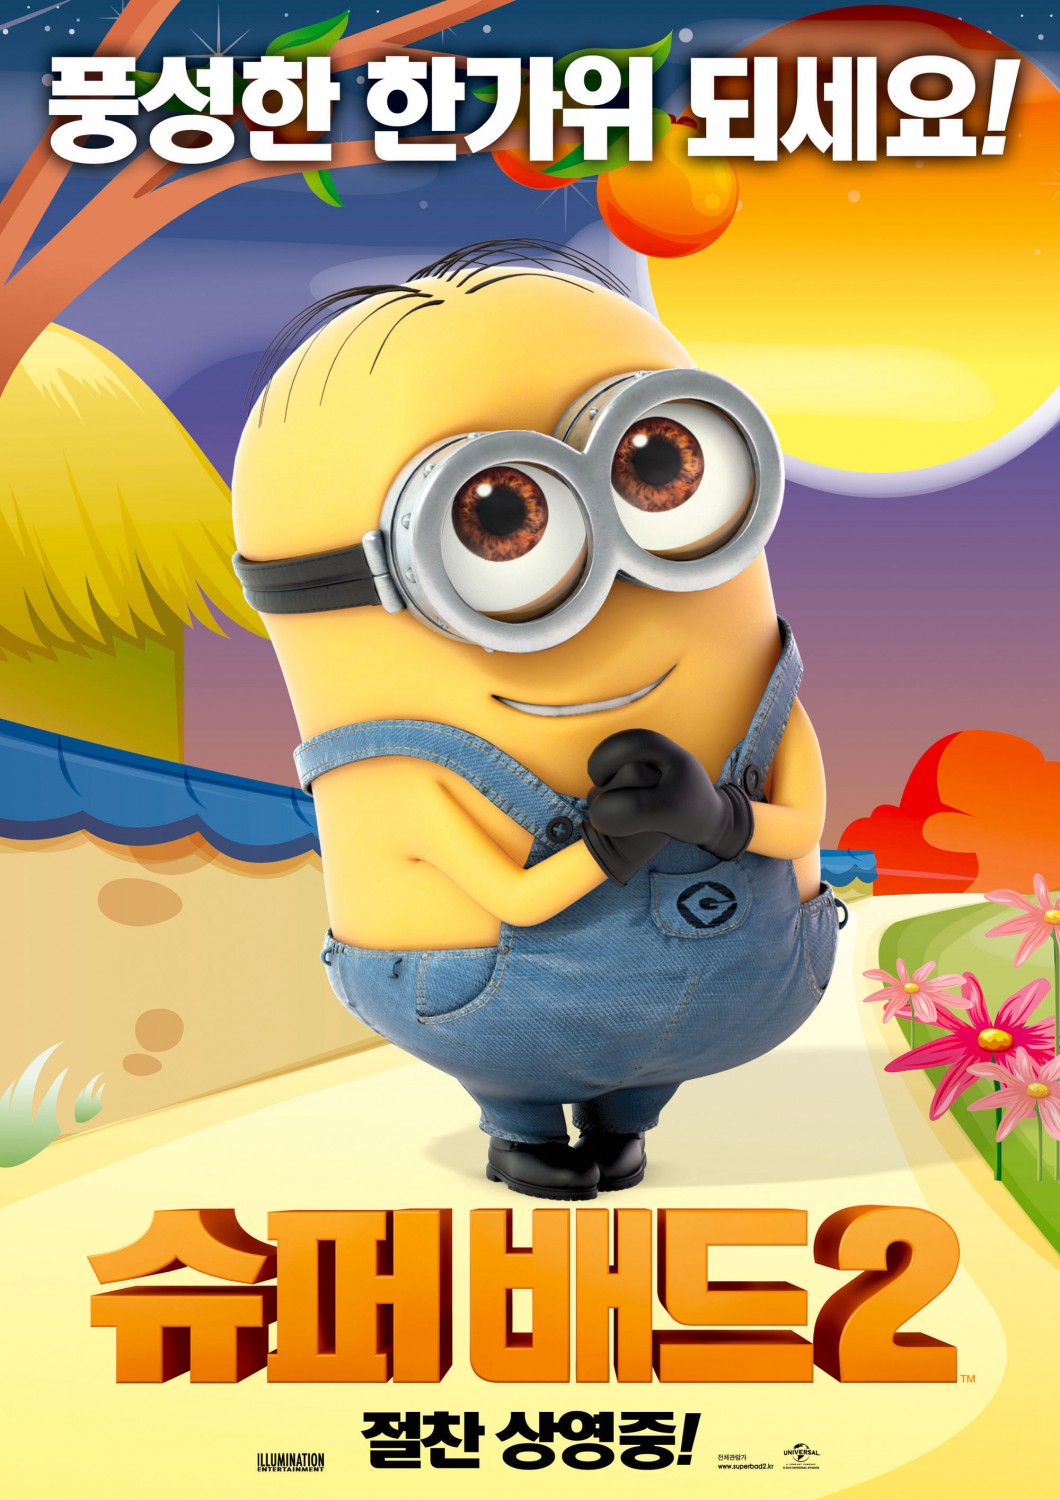 Extra Large Movie Poster Image for Despicable Me 2 (#28 of 28)